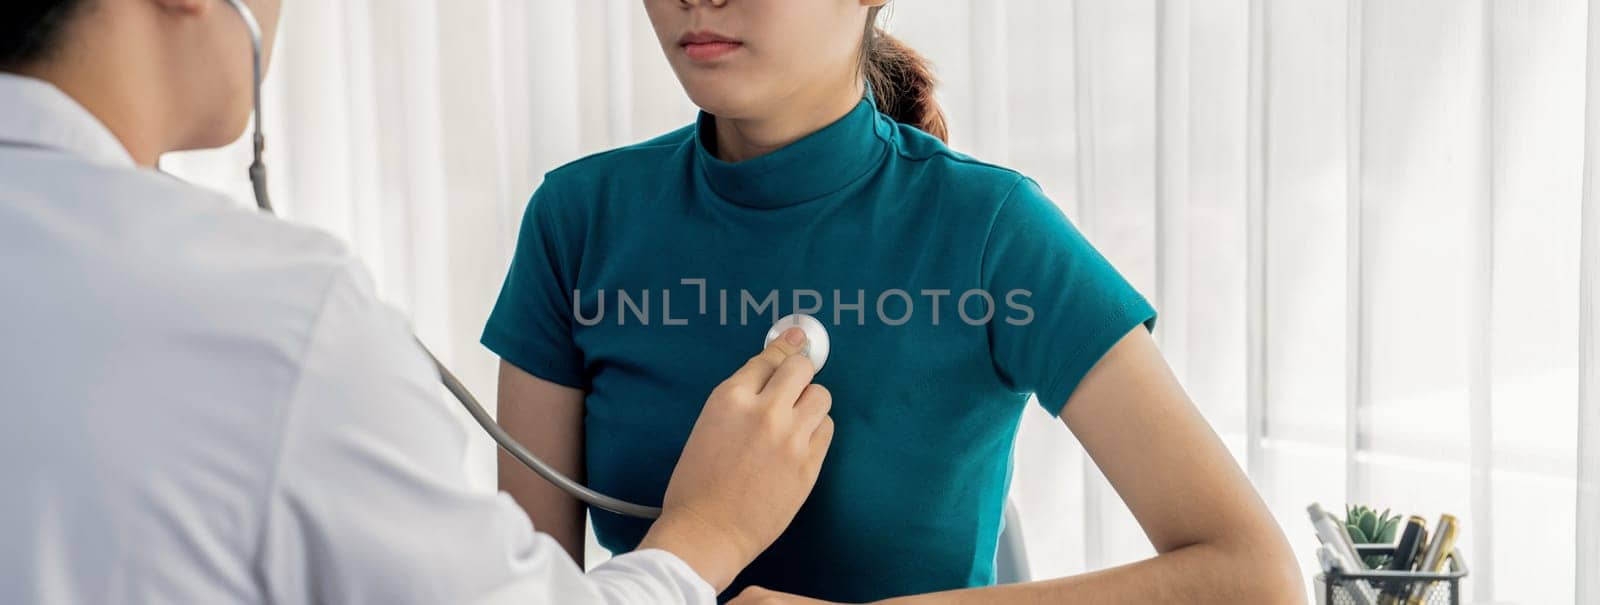 Doctor check patients's pulse with stethoscope in hospital. Rigid by biancoblue